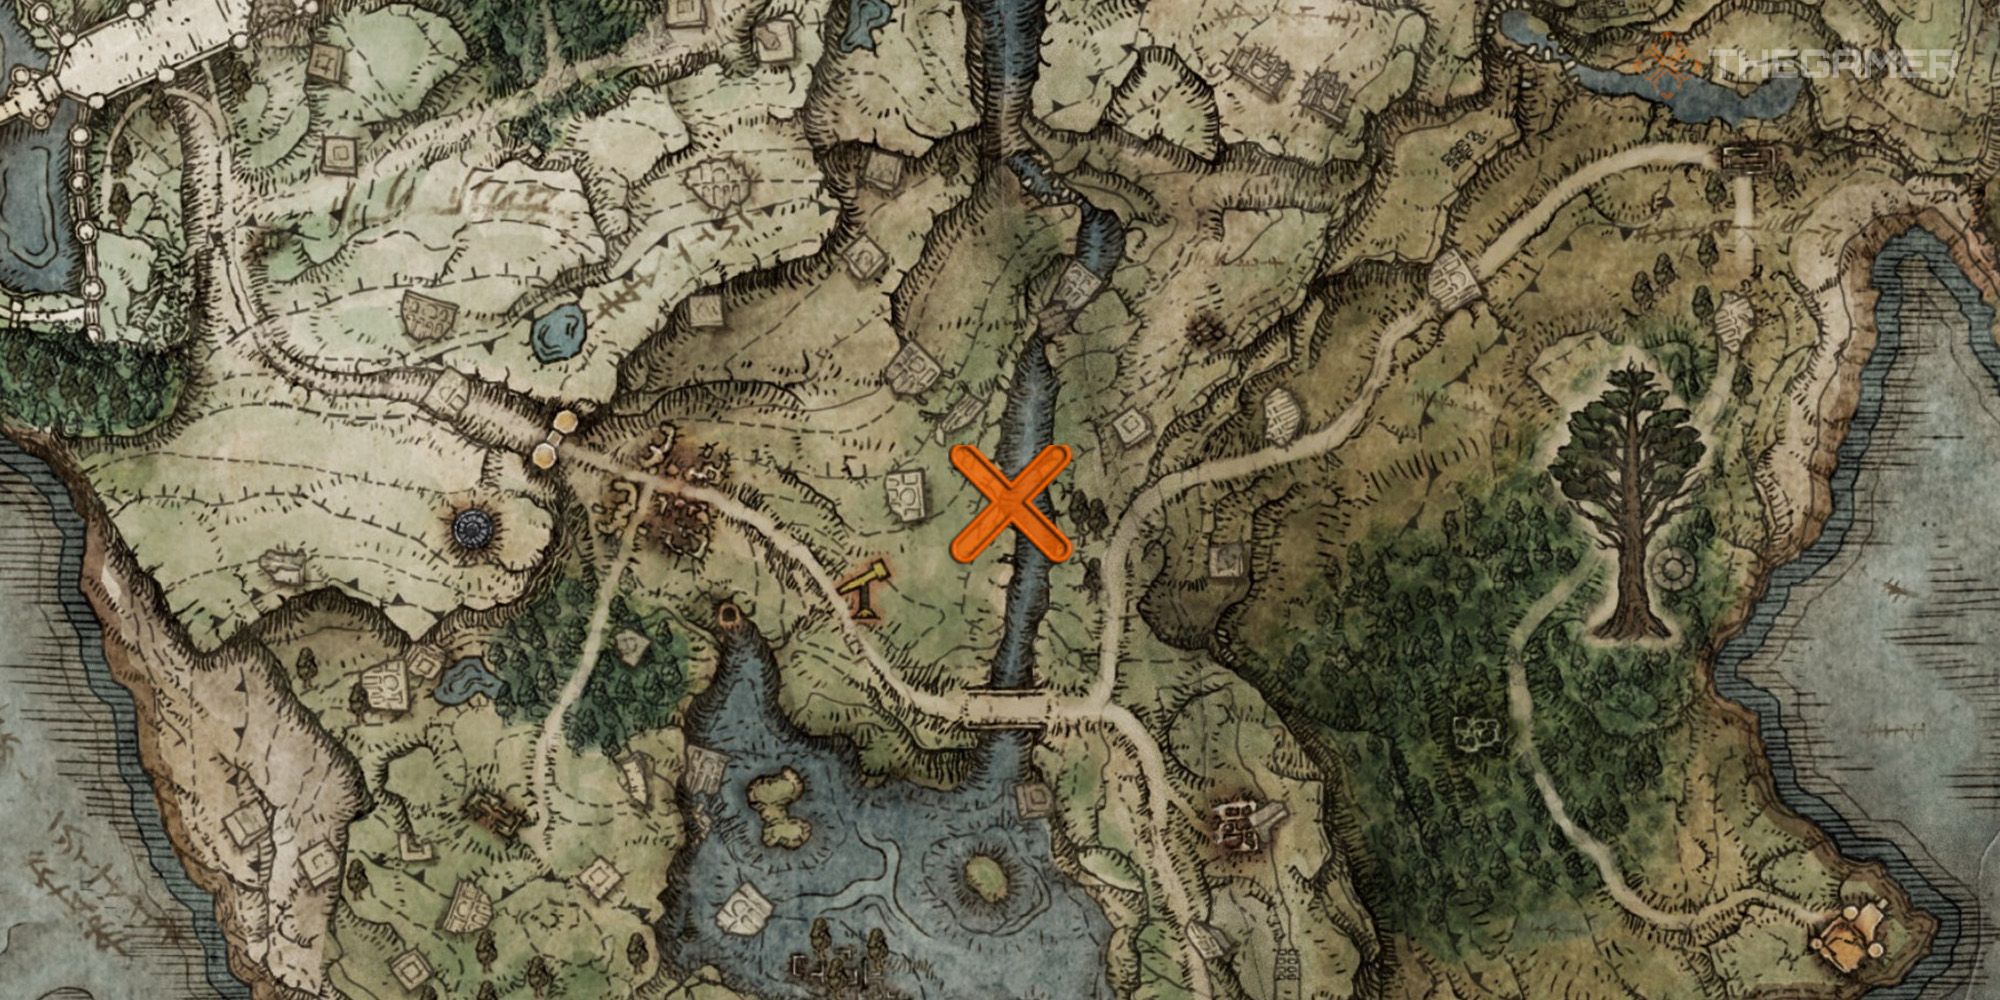 Elden Ring Map showing the location of Missionary's Cookbook [2]